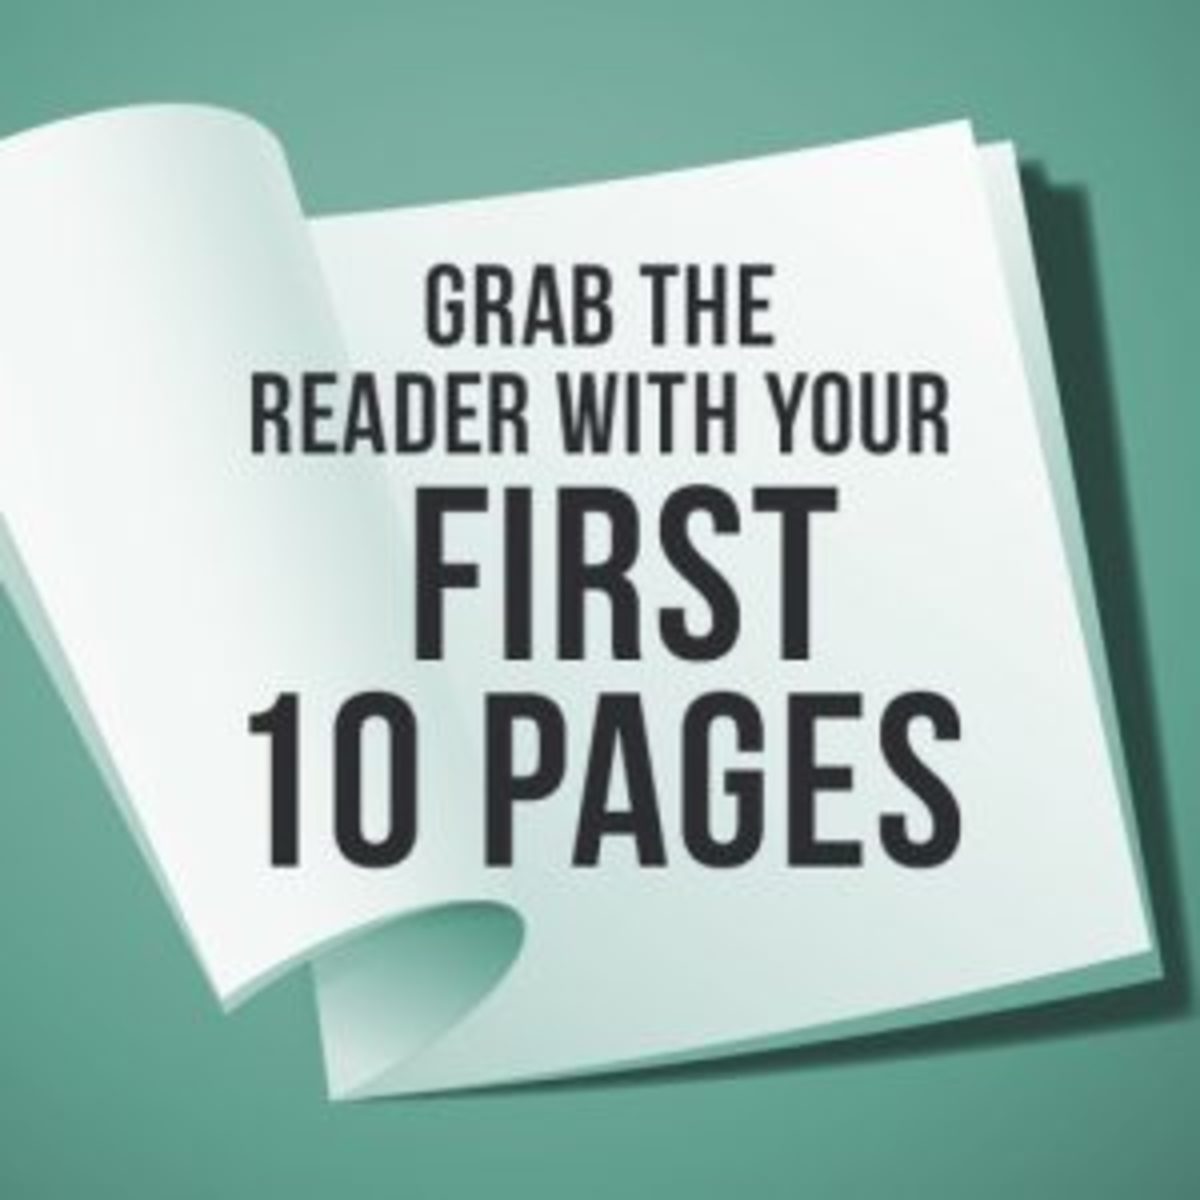 ws-first10pages-500_medium-1